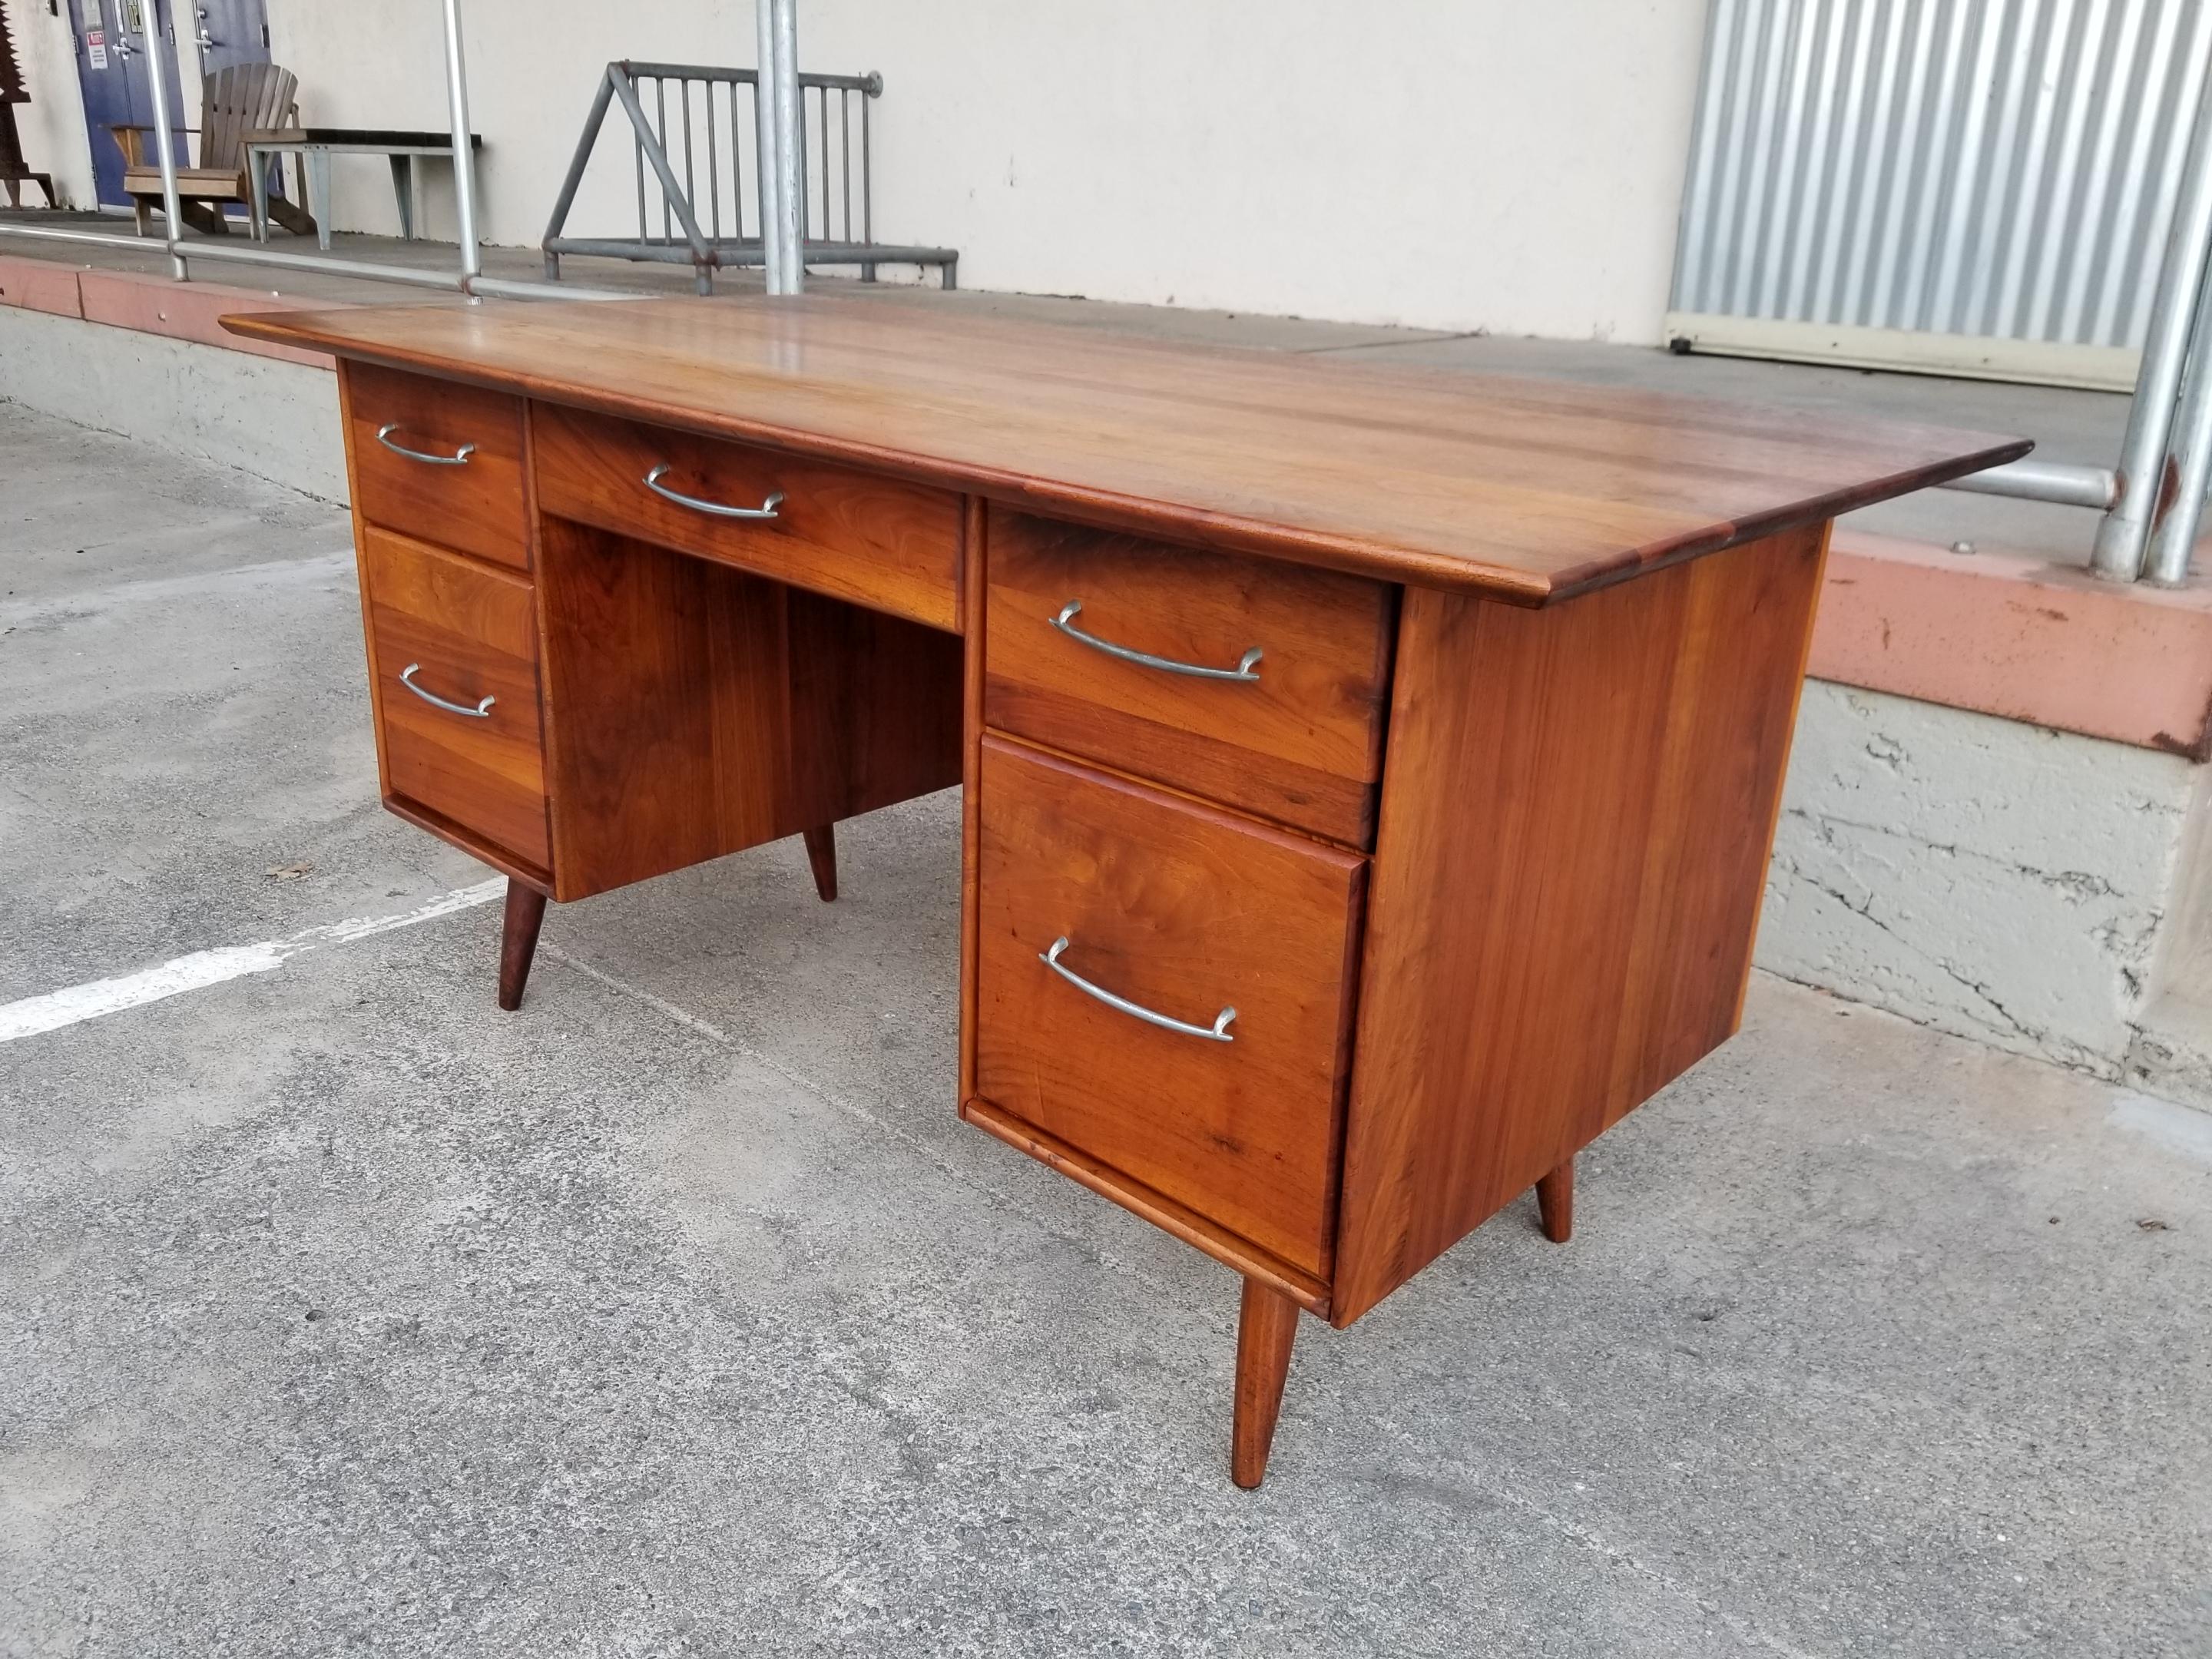 Rarely do you see a Mid-Century Modern piece made with solid walnut. Beautiful glow and depth to the solid planked walnut finish. Class peg-leg and over-hung top detail. Ample storage and surface work space as top surface measures 30